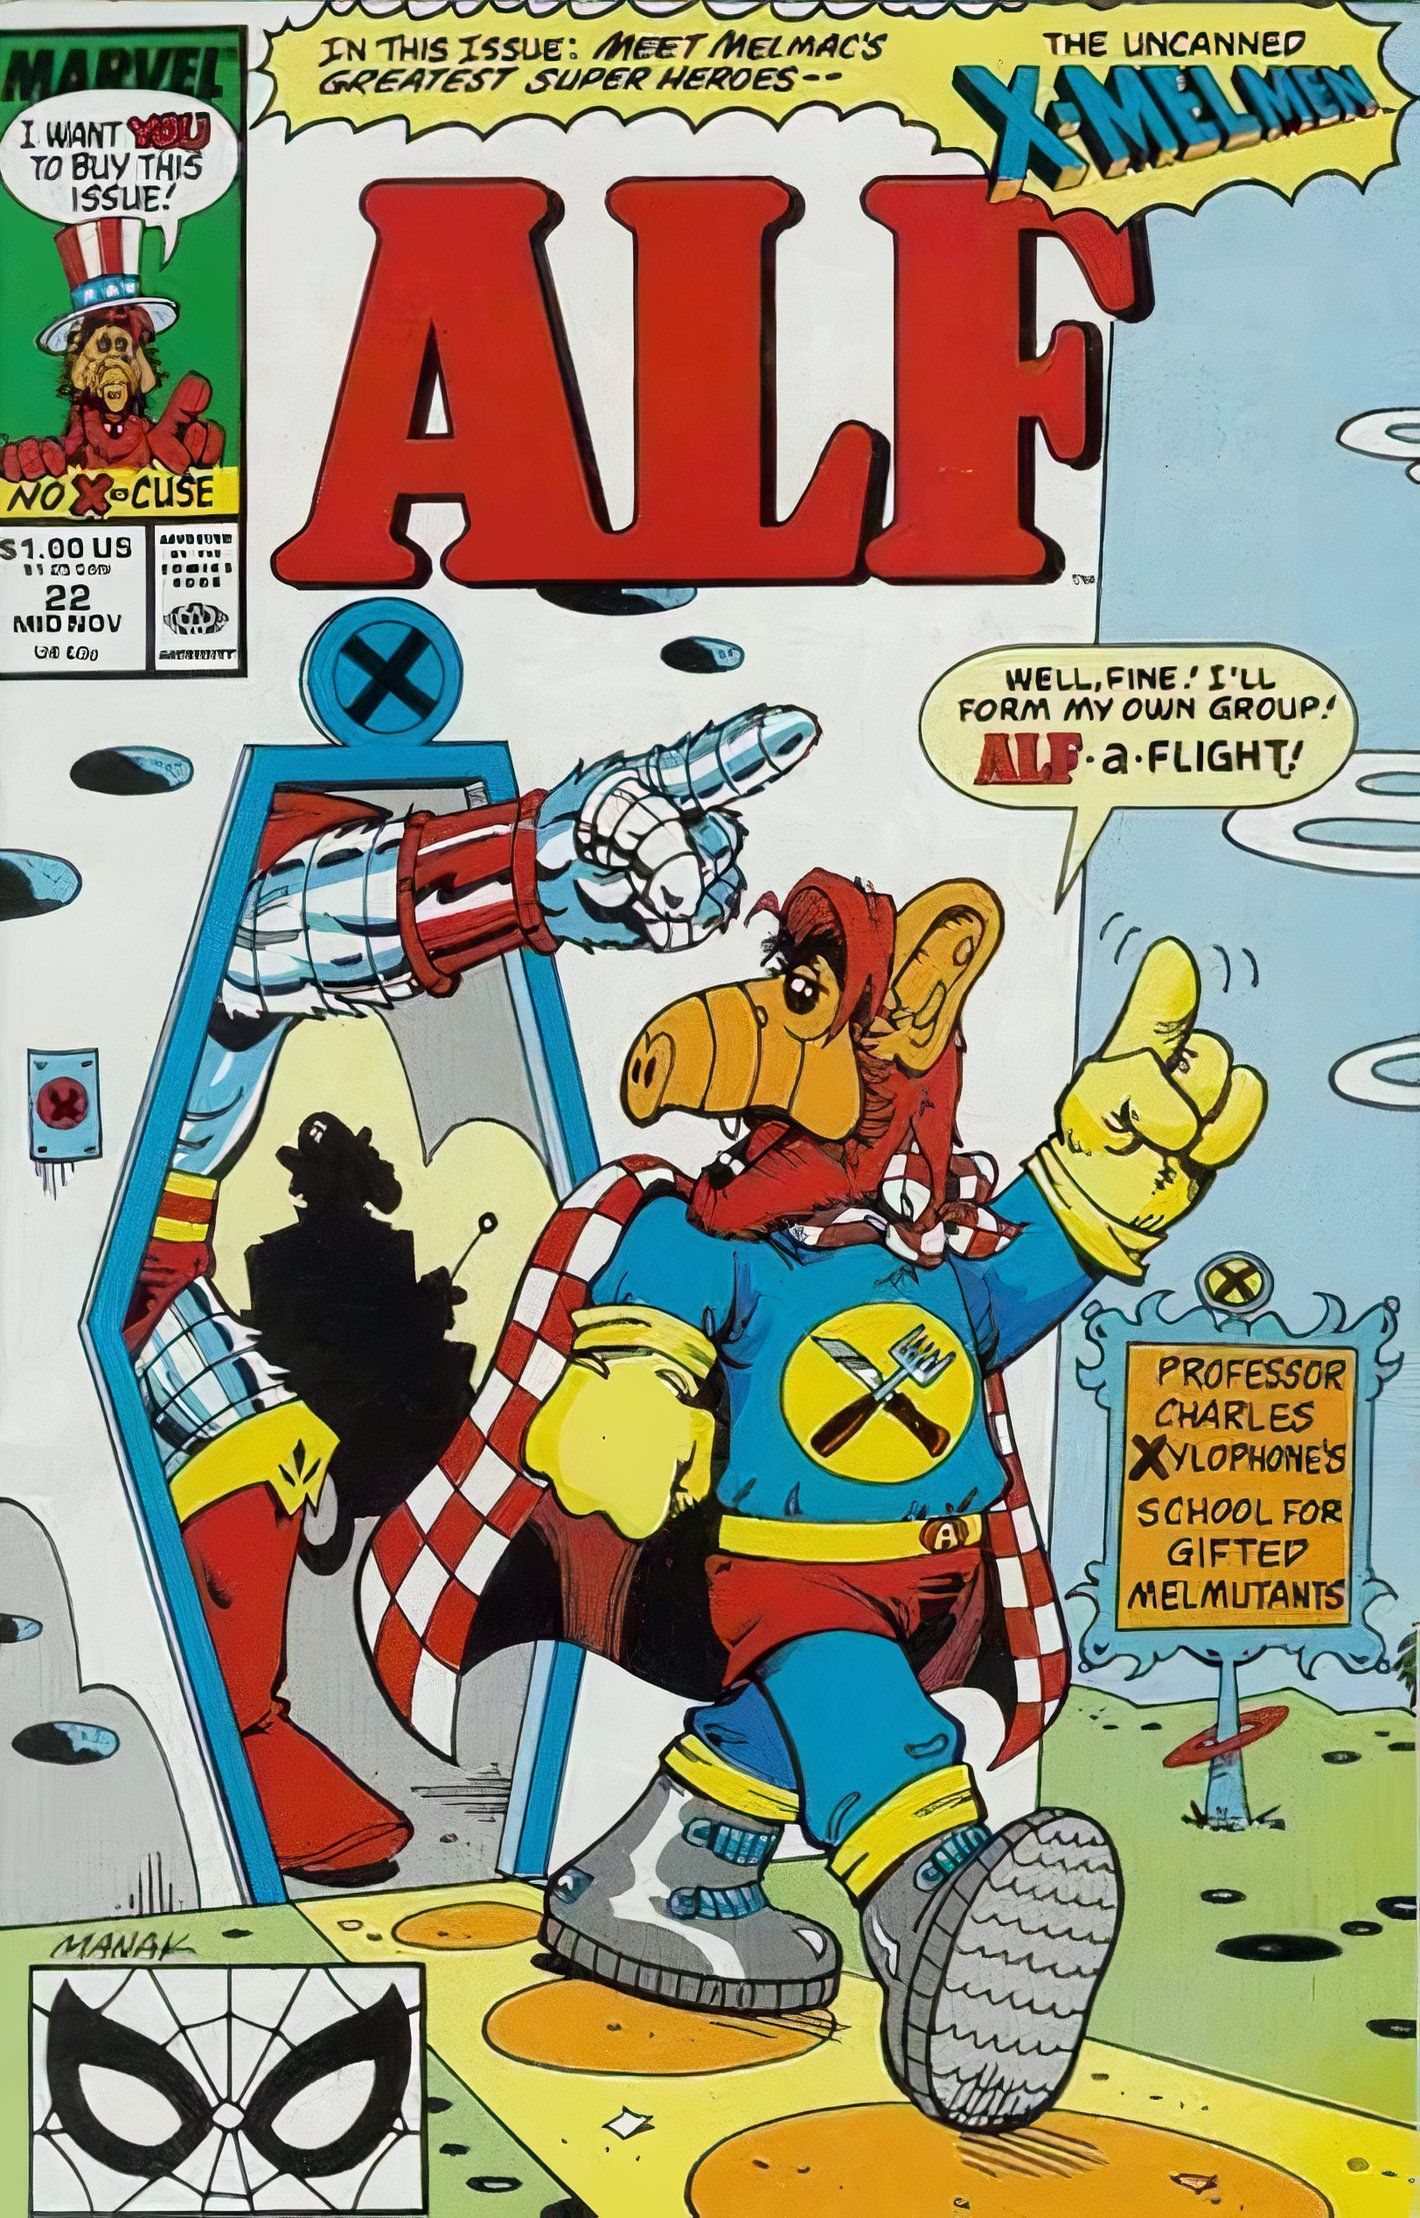 Cover for ALF #22, featuring the 'Uncanned X-Men' parody.